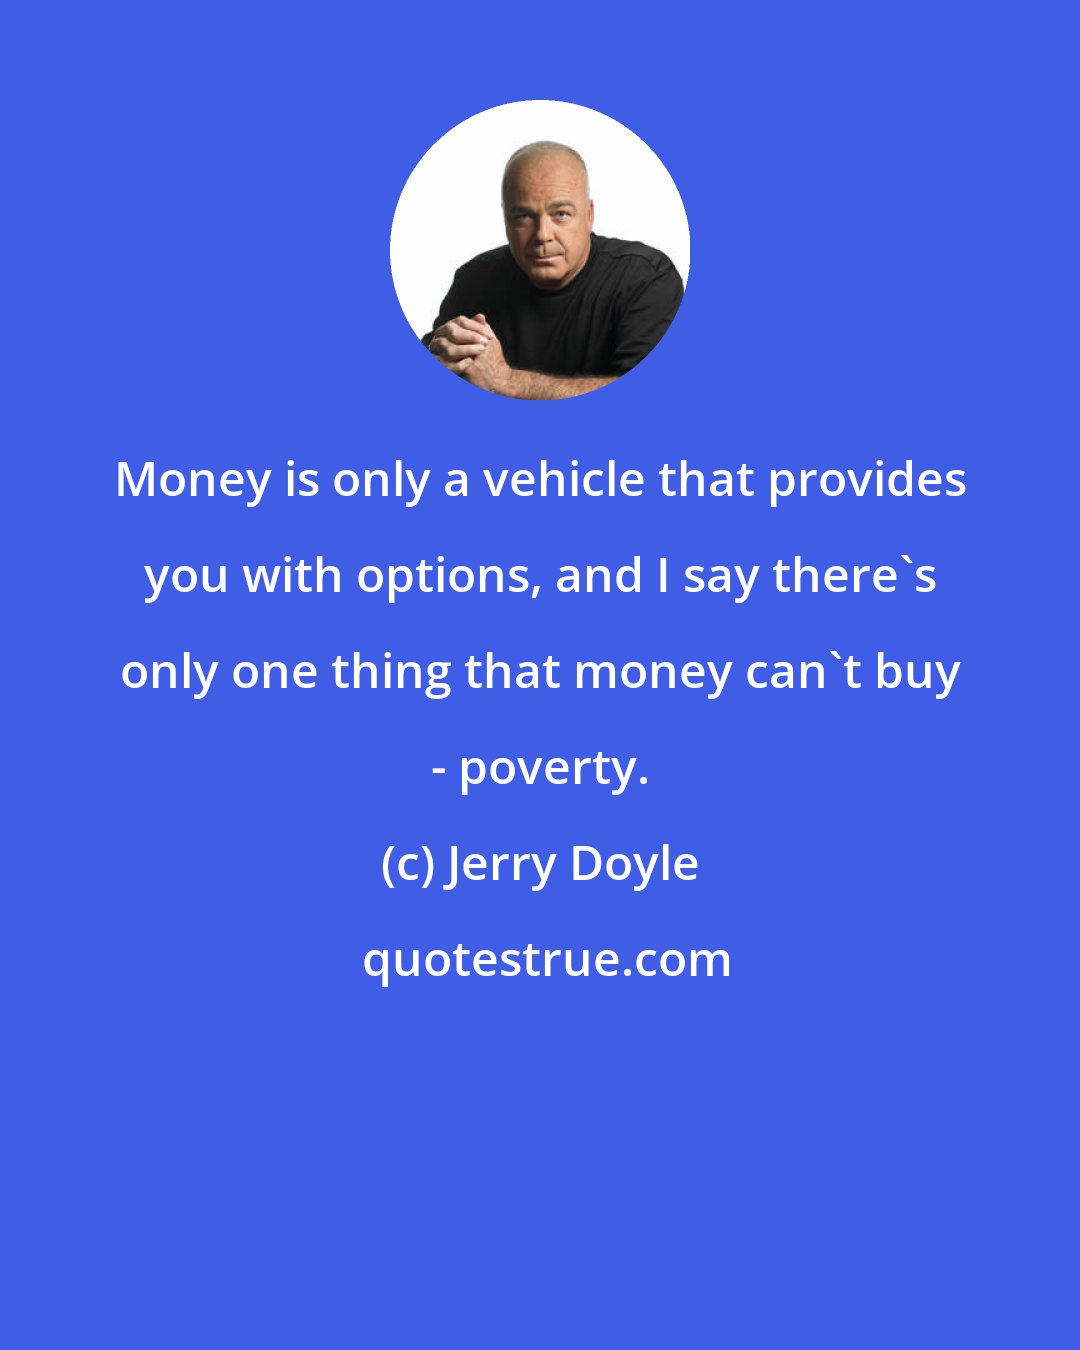 Jerry Doyle: Money is only a vehicle that provides you with options, and I say there's only one thing that money can't buy - poverty.